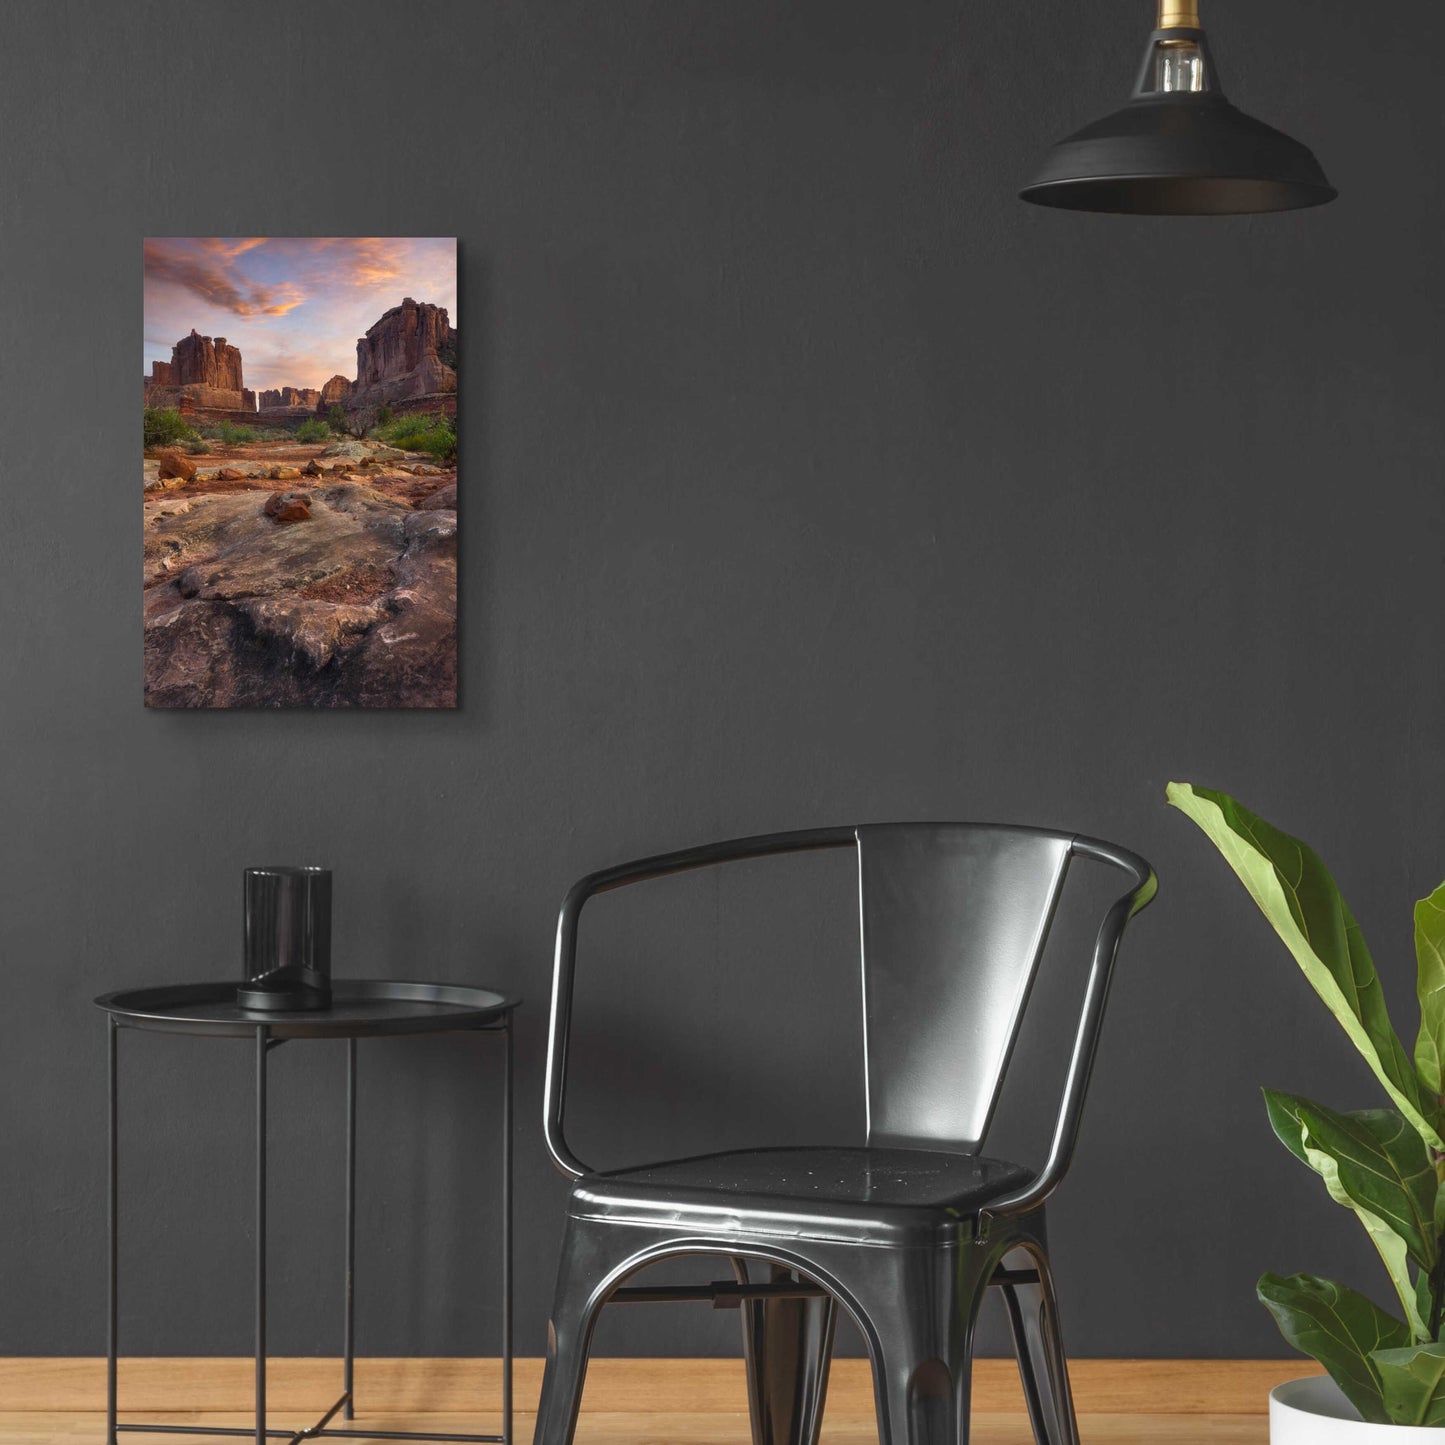 Epic Art 'Park Avenue Sunset - Arches National Park' by Darren White, Acrylic Glass Wall Art,16x24